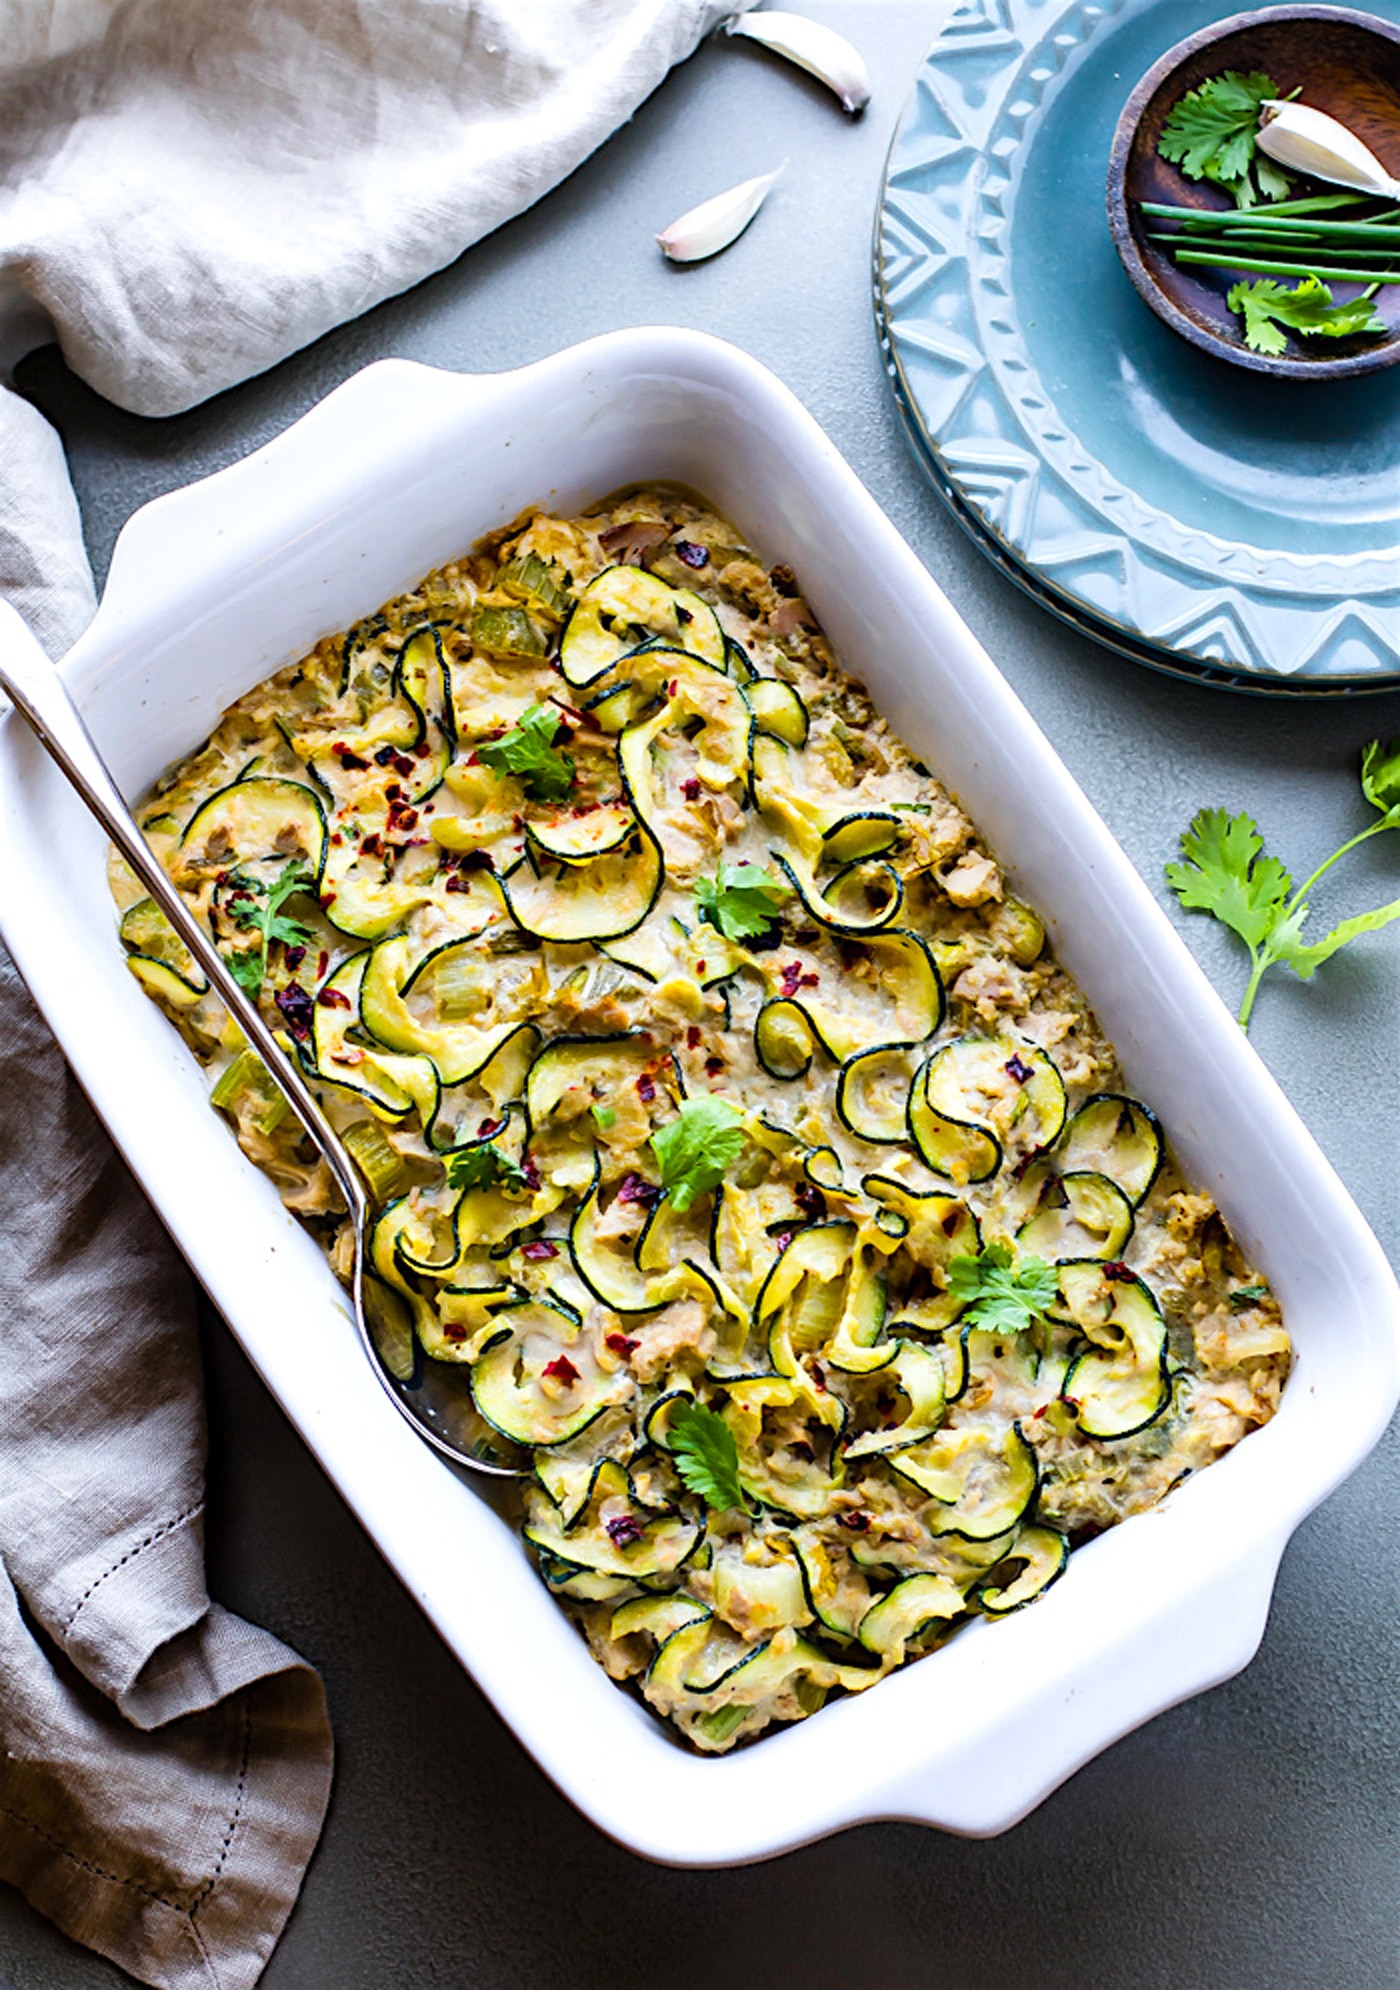 Paleo Tuna Green Chile Zoodle Casserole. An easy, paleo, zucchini noodle casserole that's Whole 30 approved, high protein, and low carb. Hearty yet healthy, this dish can feed a family! A great way to use your spiralizer and boost your nutrition. | CotterCrunch.com